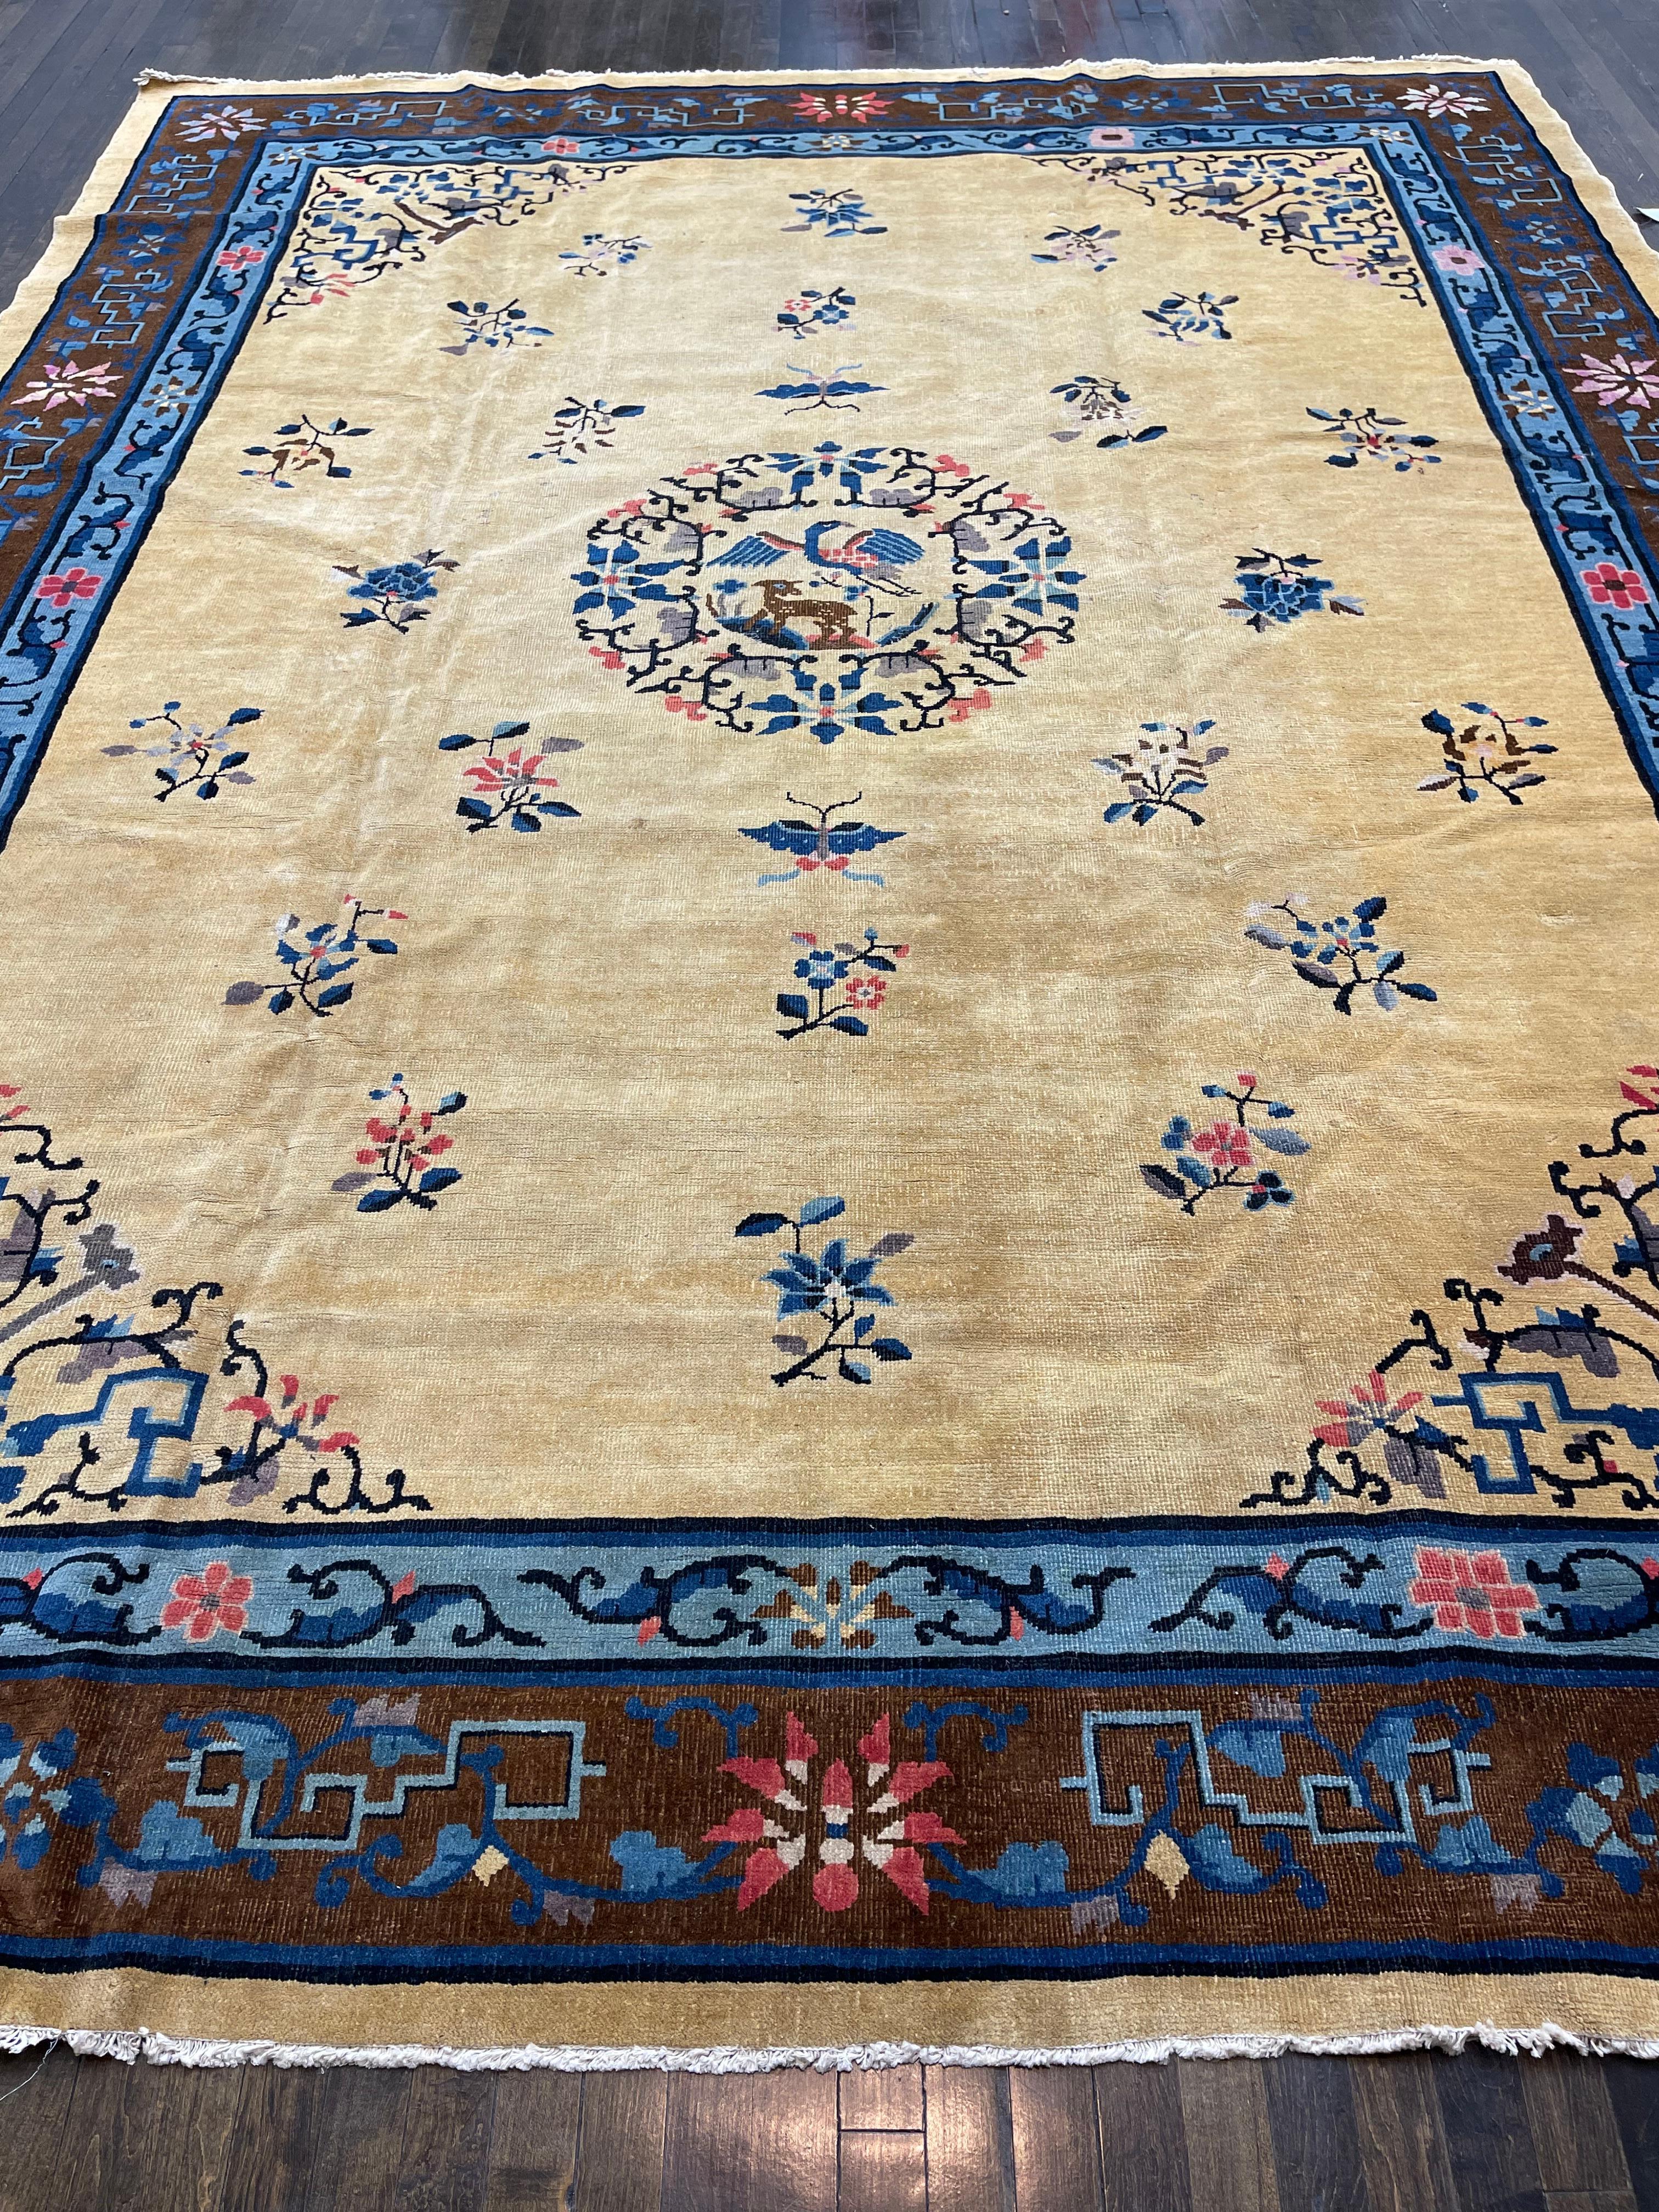 This antique carpet is hand knotted in China circa 1910. Known as mainland Chinese these carpets were made with high quality wool and all organic dyes, which makes them really age well and develop a nice patina.

Having a tan/brown field with